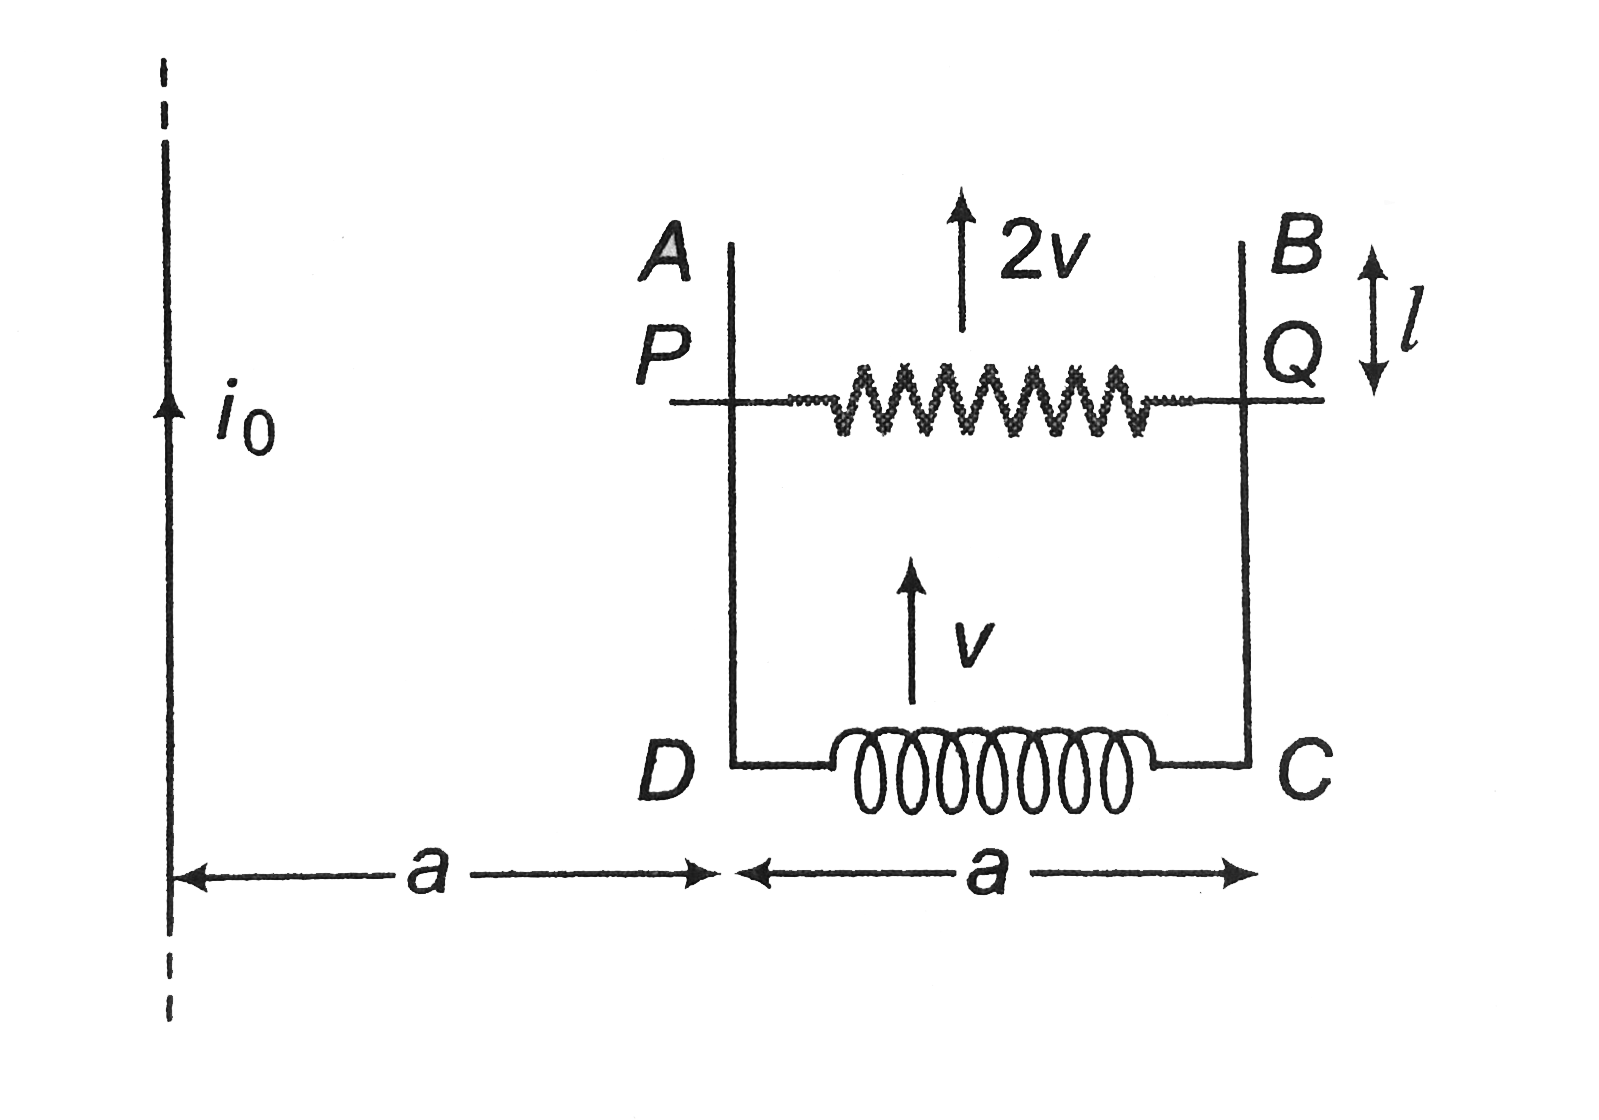 U-frame ABCD and a sliding rod PQ of resistance R, start moving with velocities v and 2v respectively, parallel to a long wire carrying current i0. When the distance AP =1 at t = 0, determine the current through the inductor of inductance L just before connecting rod PQ loses contact with the U-frame.